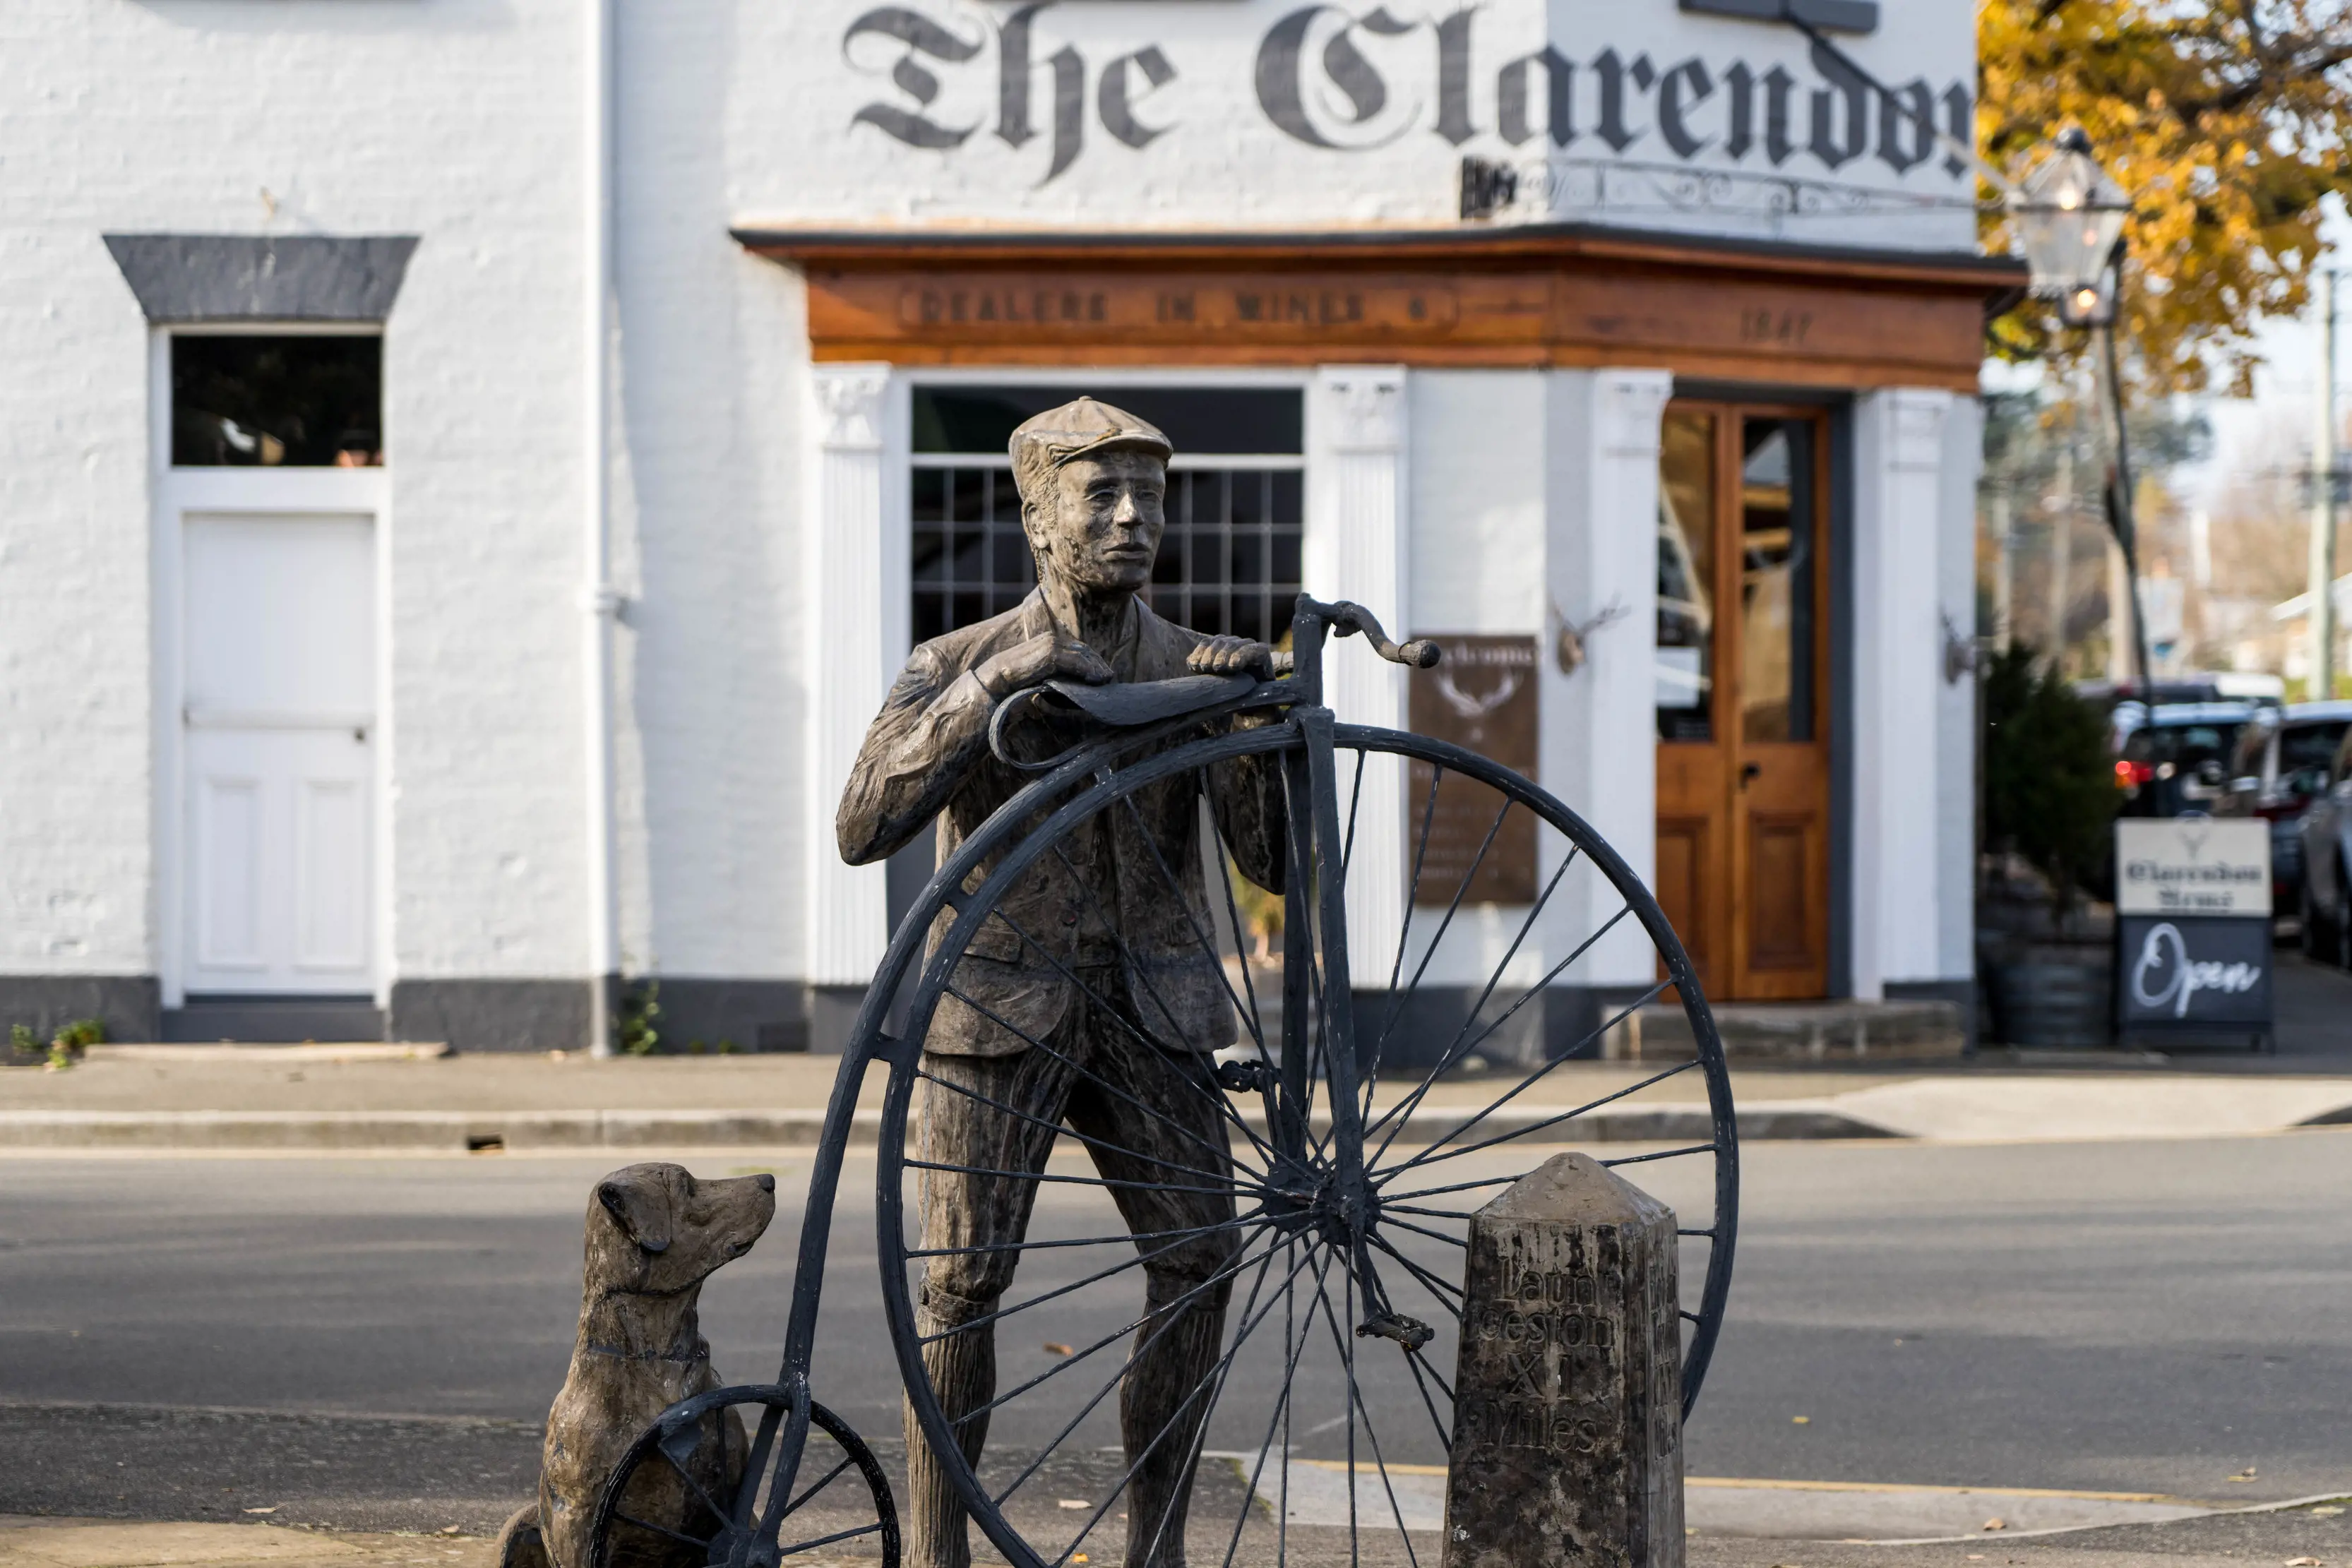 A historical statue outside Clarendon Arms pub in Evandale.